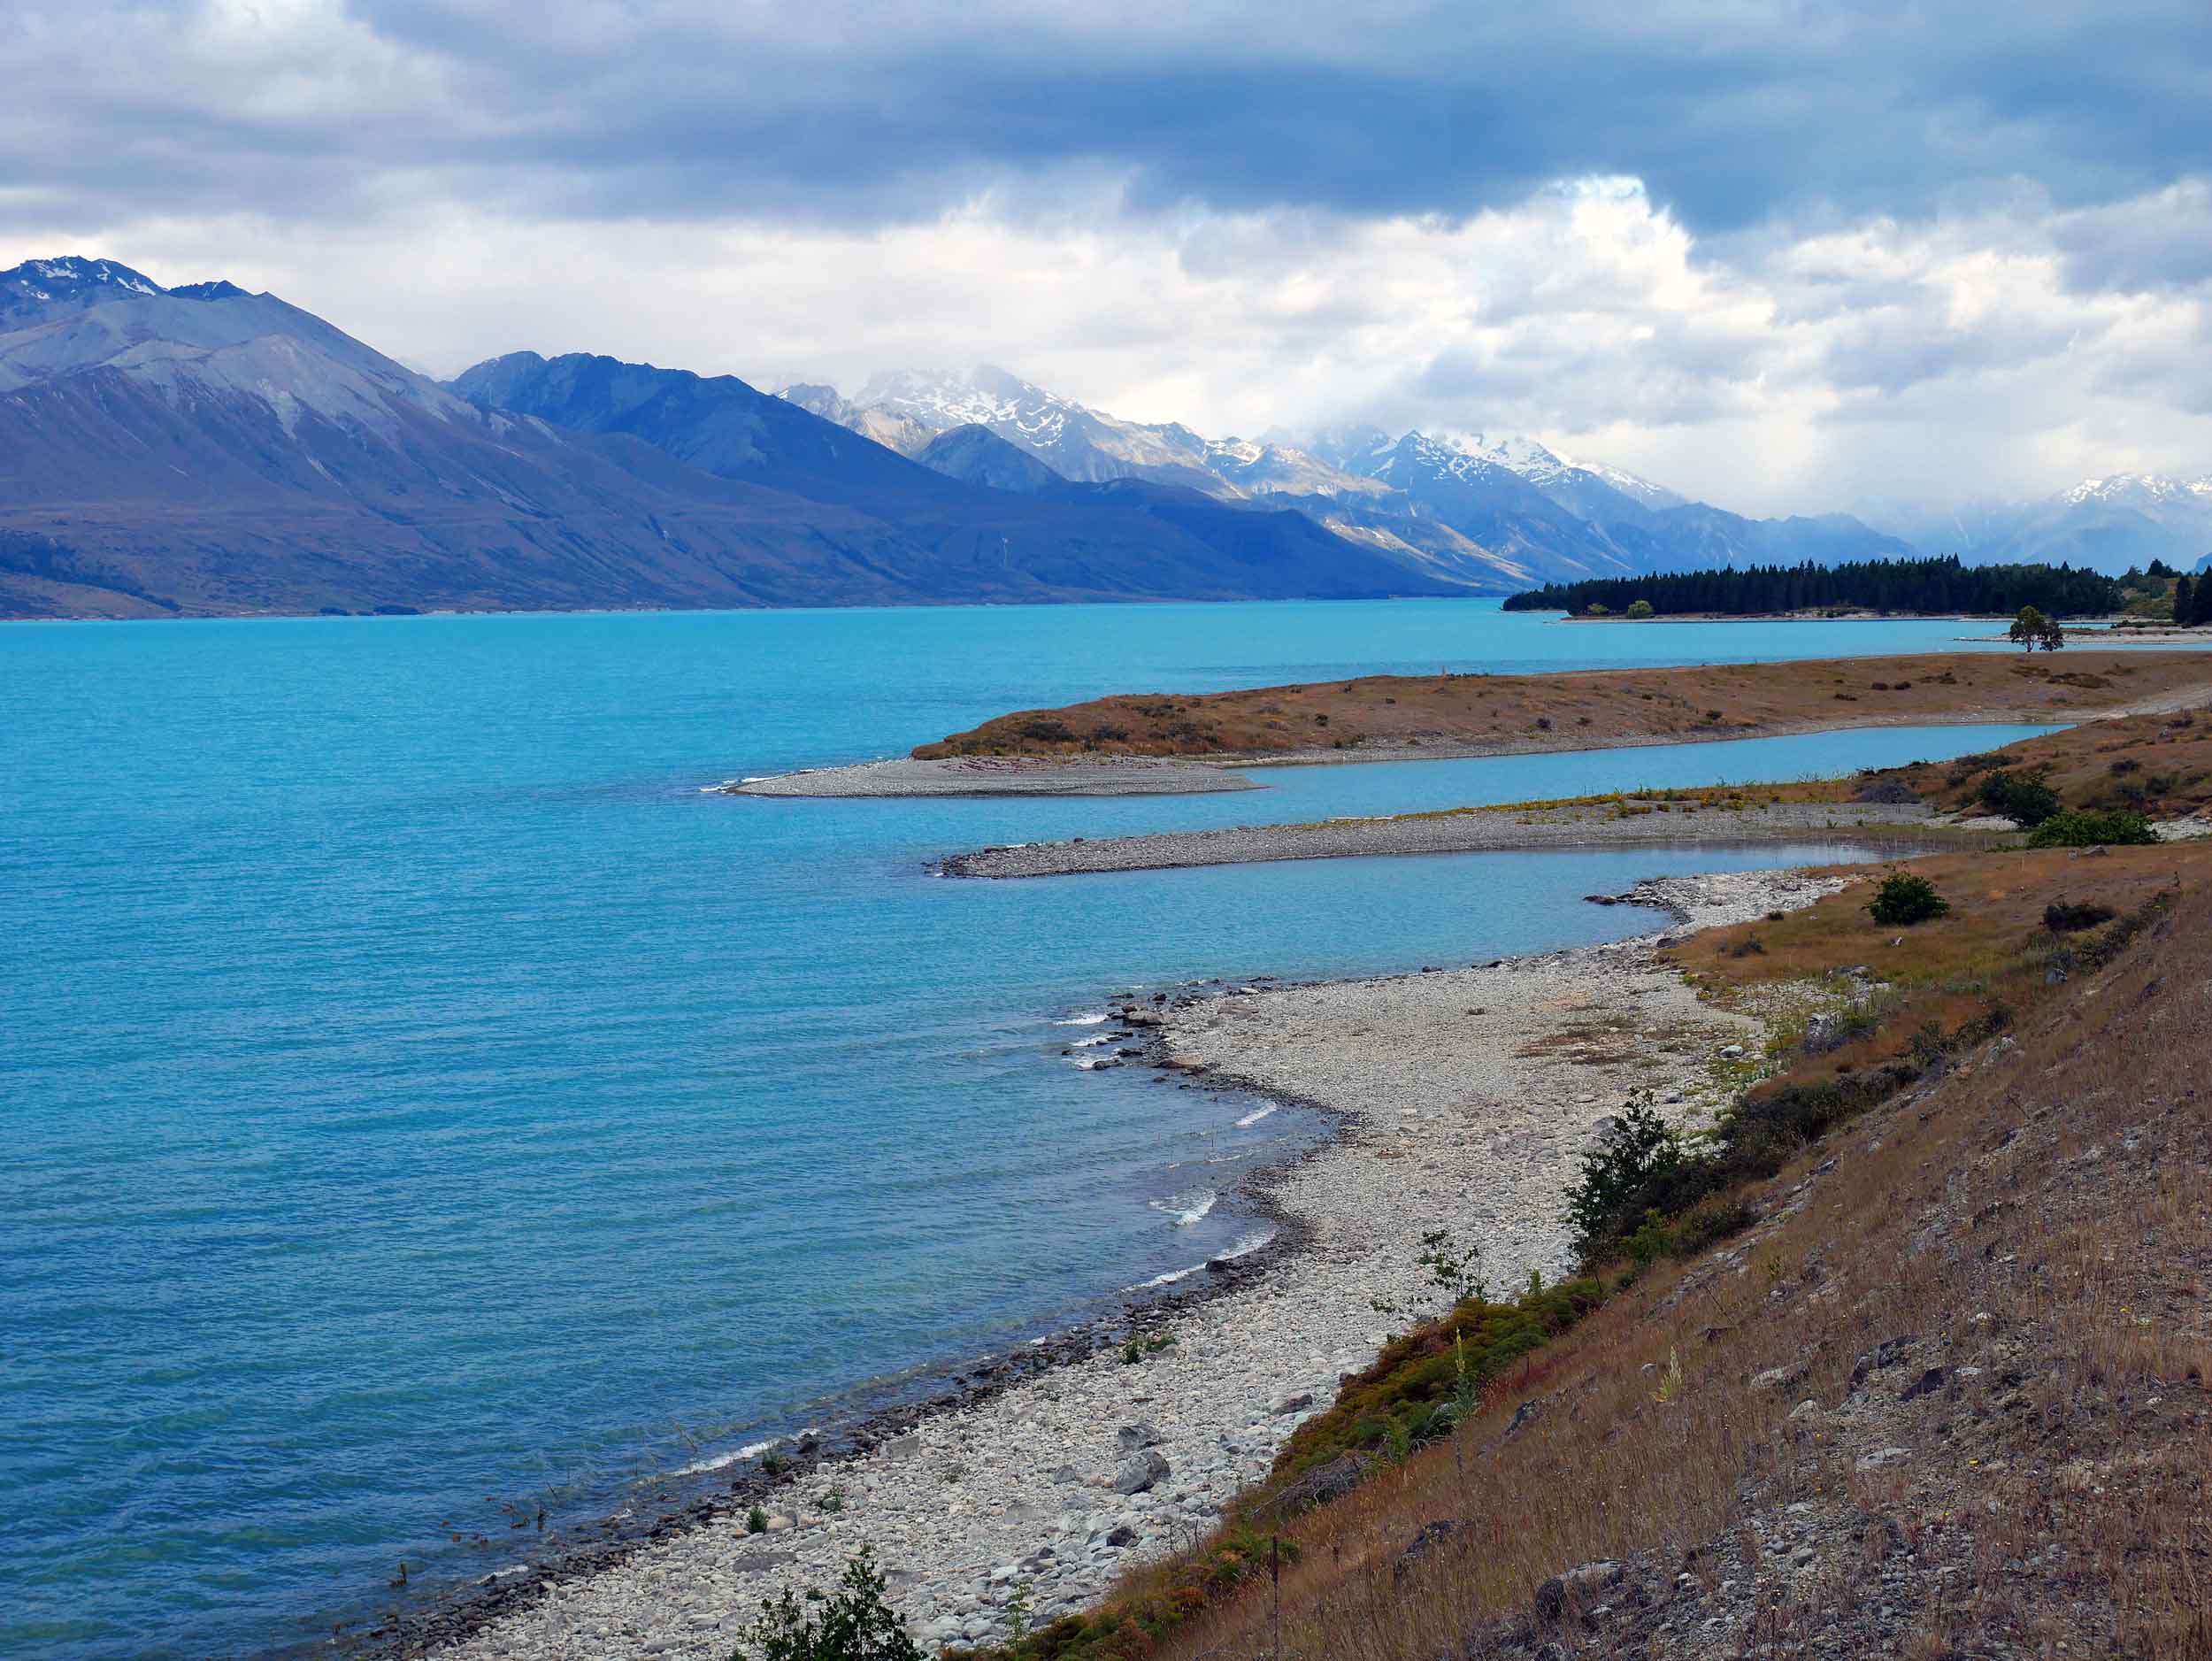  One of three parallel Alpine lakes, Lake Pukaki was formed when moraines of a receding glacier blocked its valley. The glacial runoff gives it a distinctive blue color (Jan 11).&nbsp; 